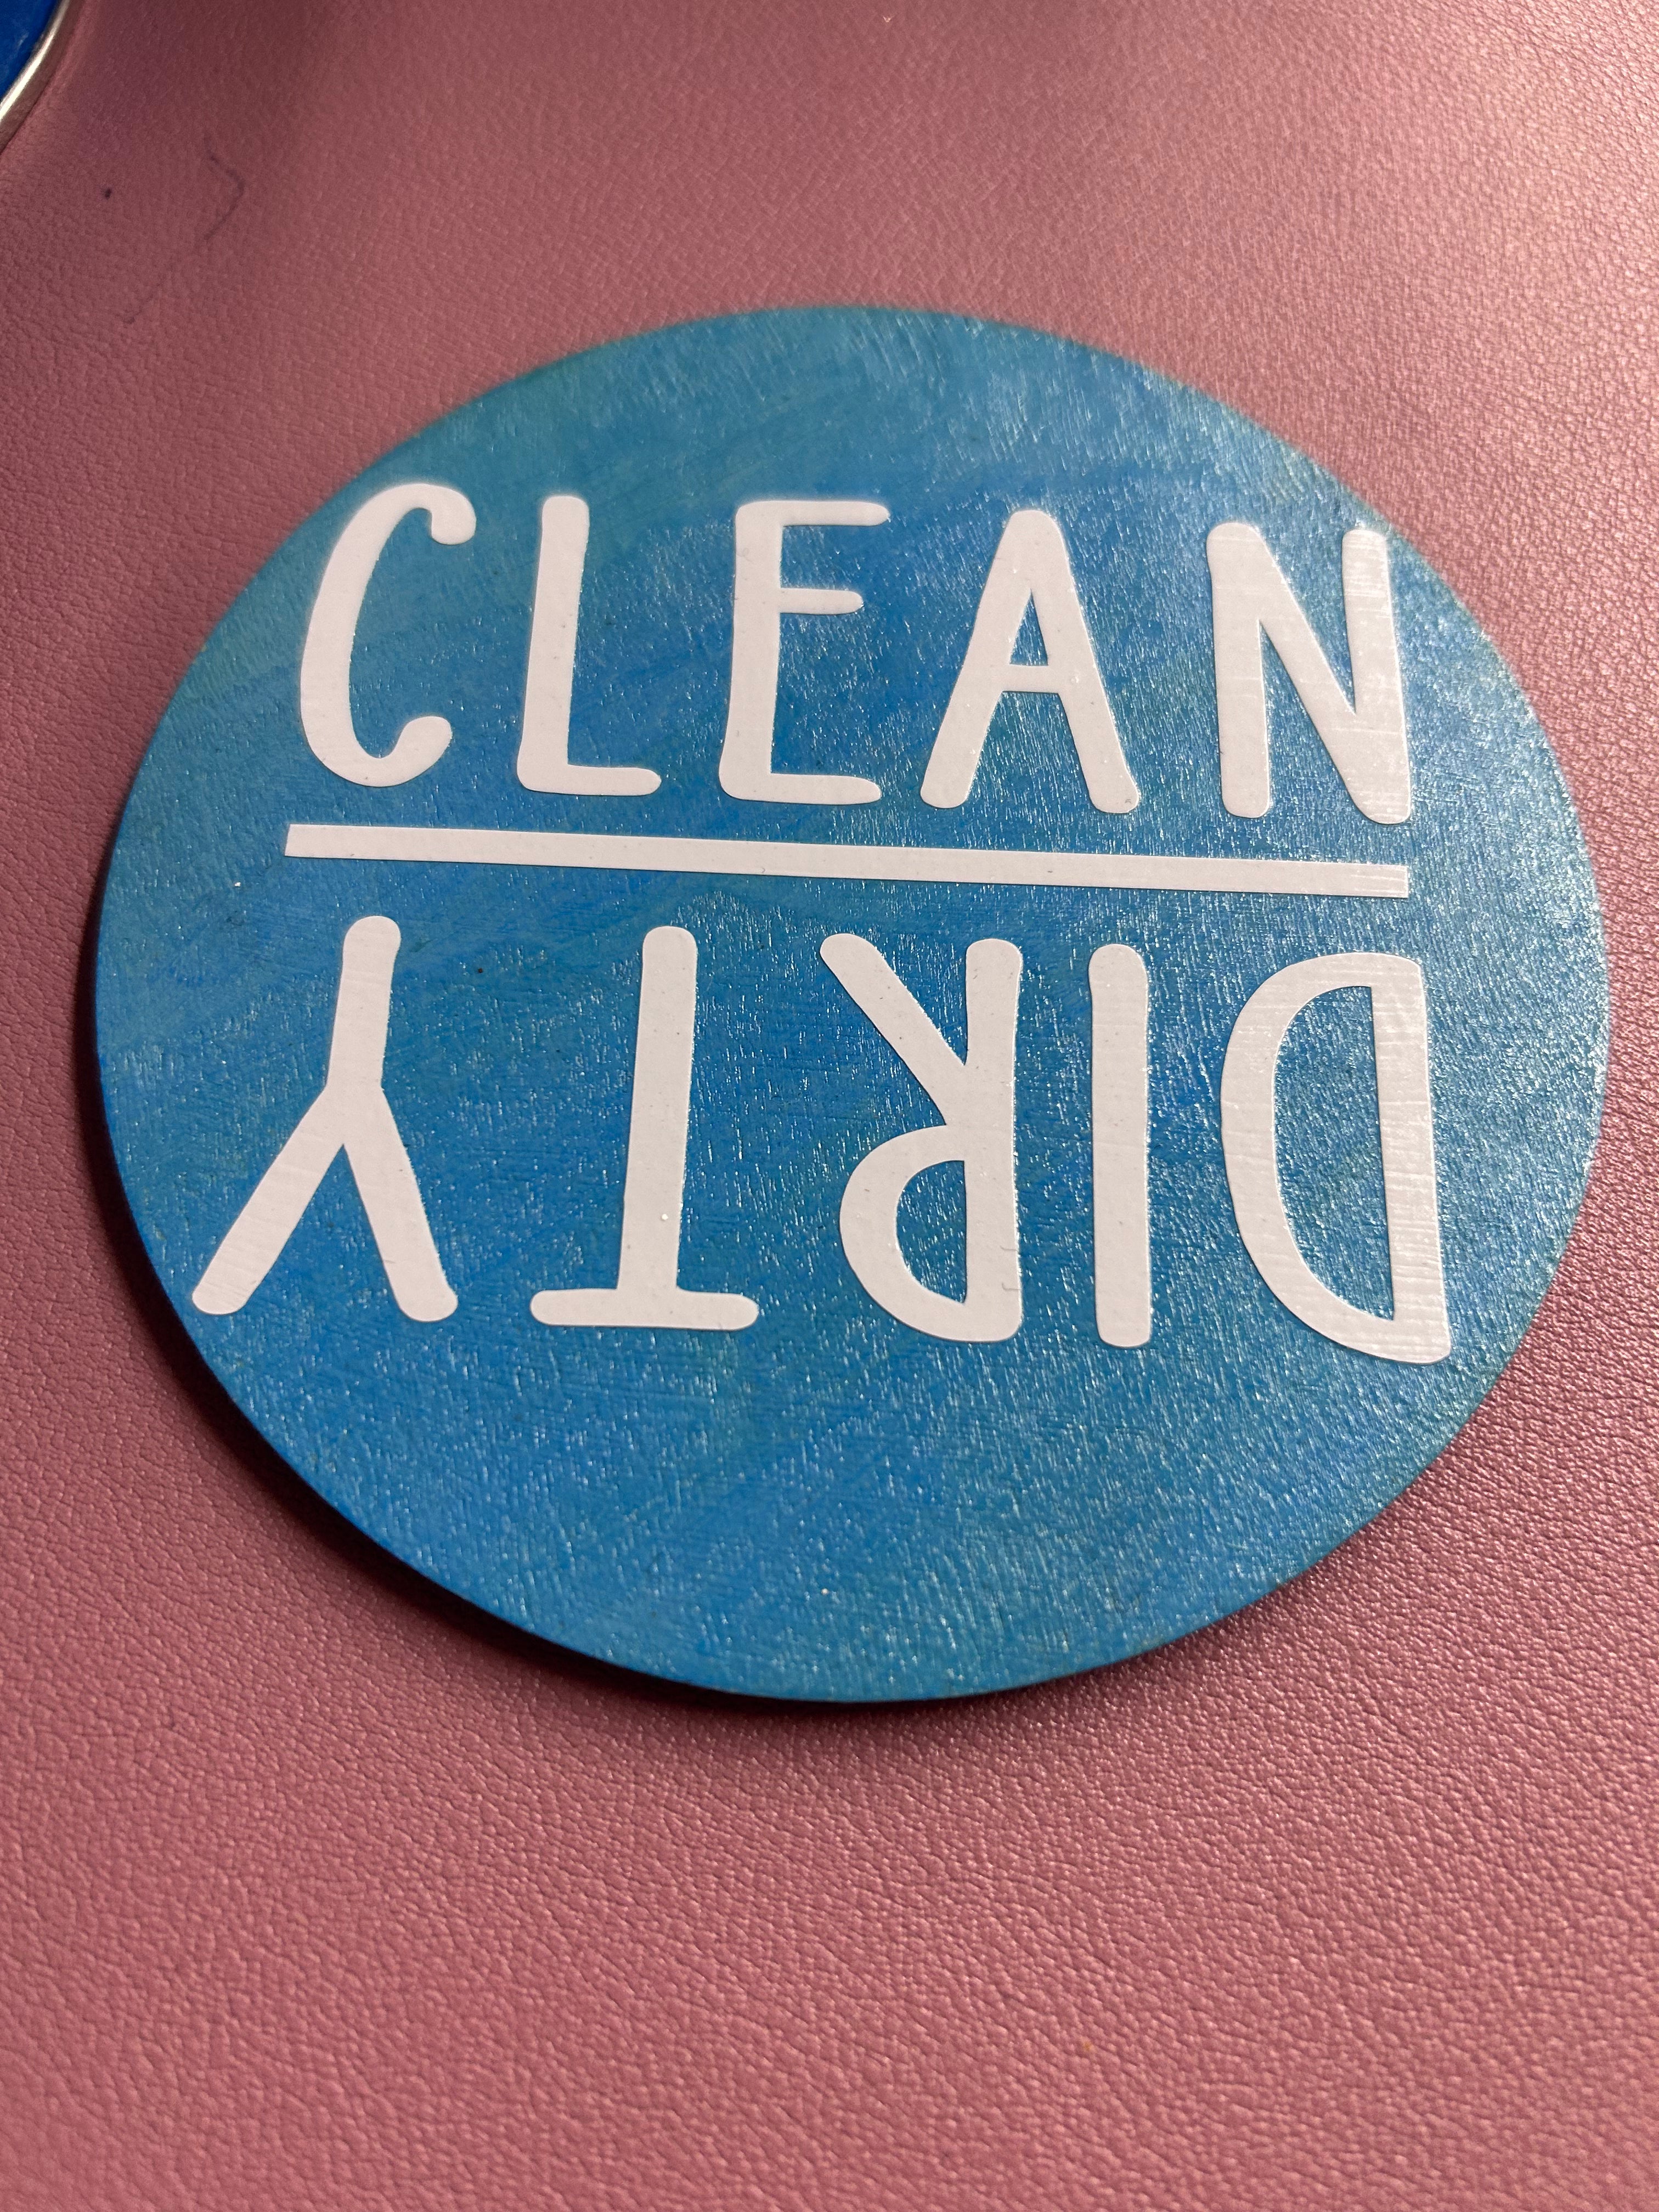 Clean/ dirty dishwasher magnet